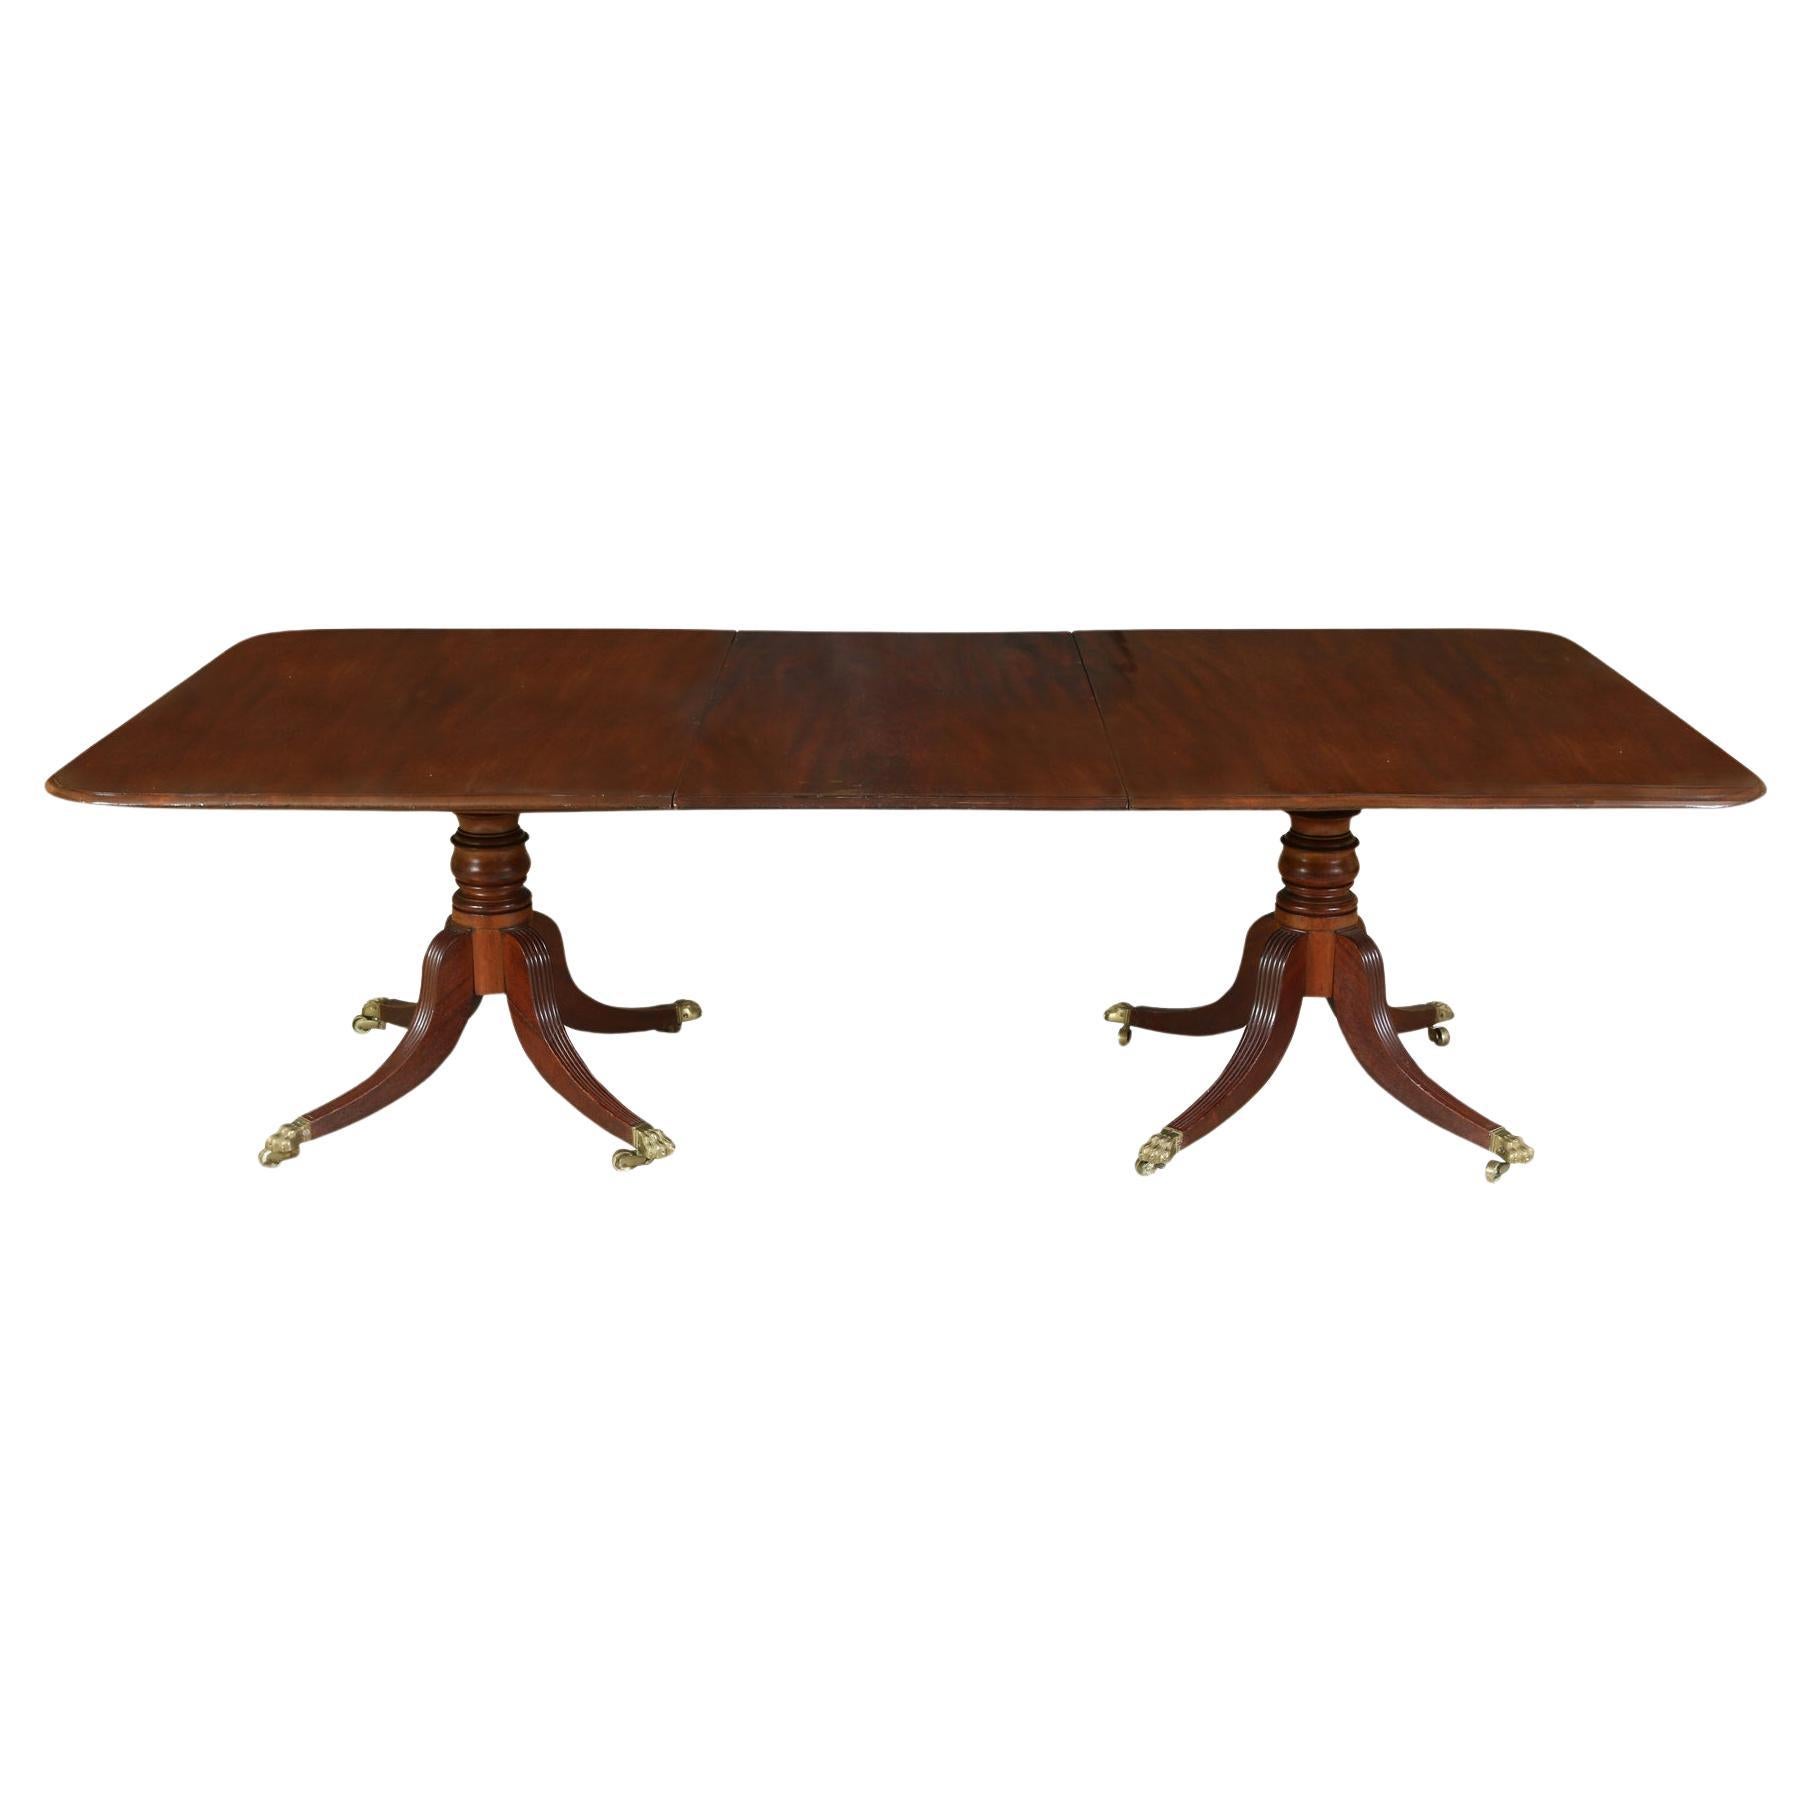 Double Pedestal Polished Mahogany Dining Table With Multiple Leaves